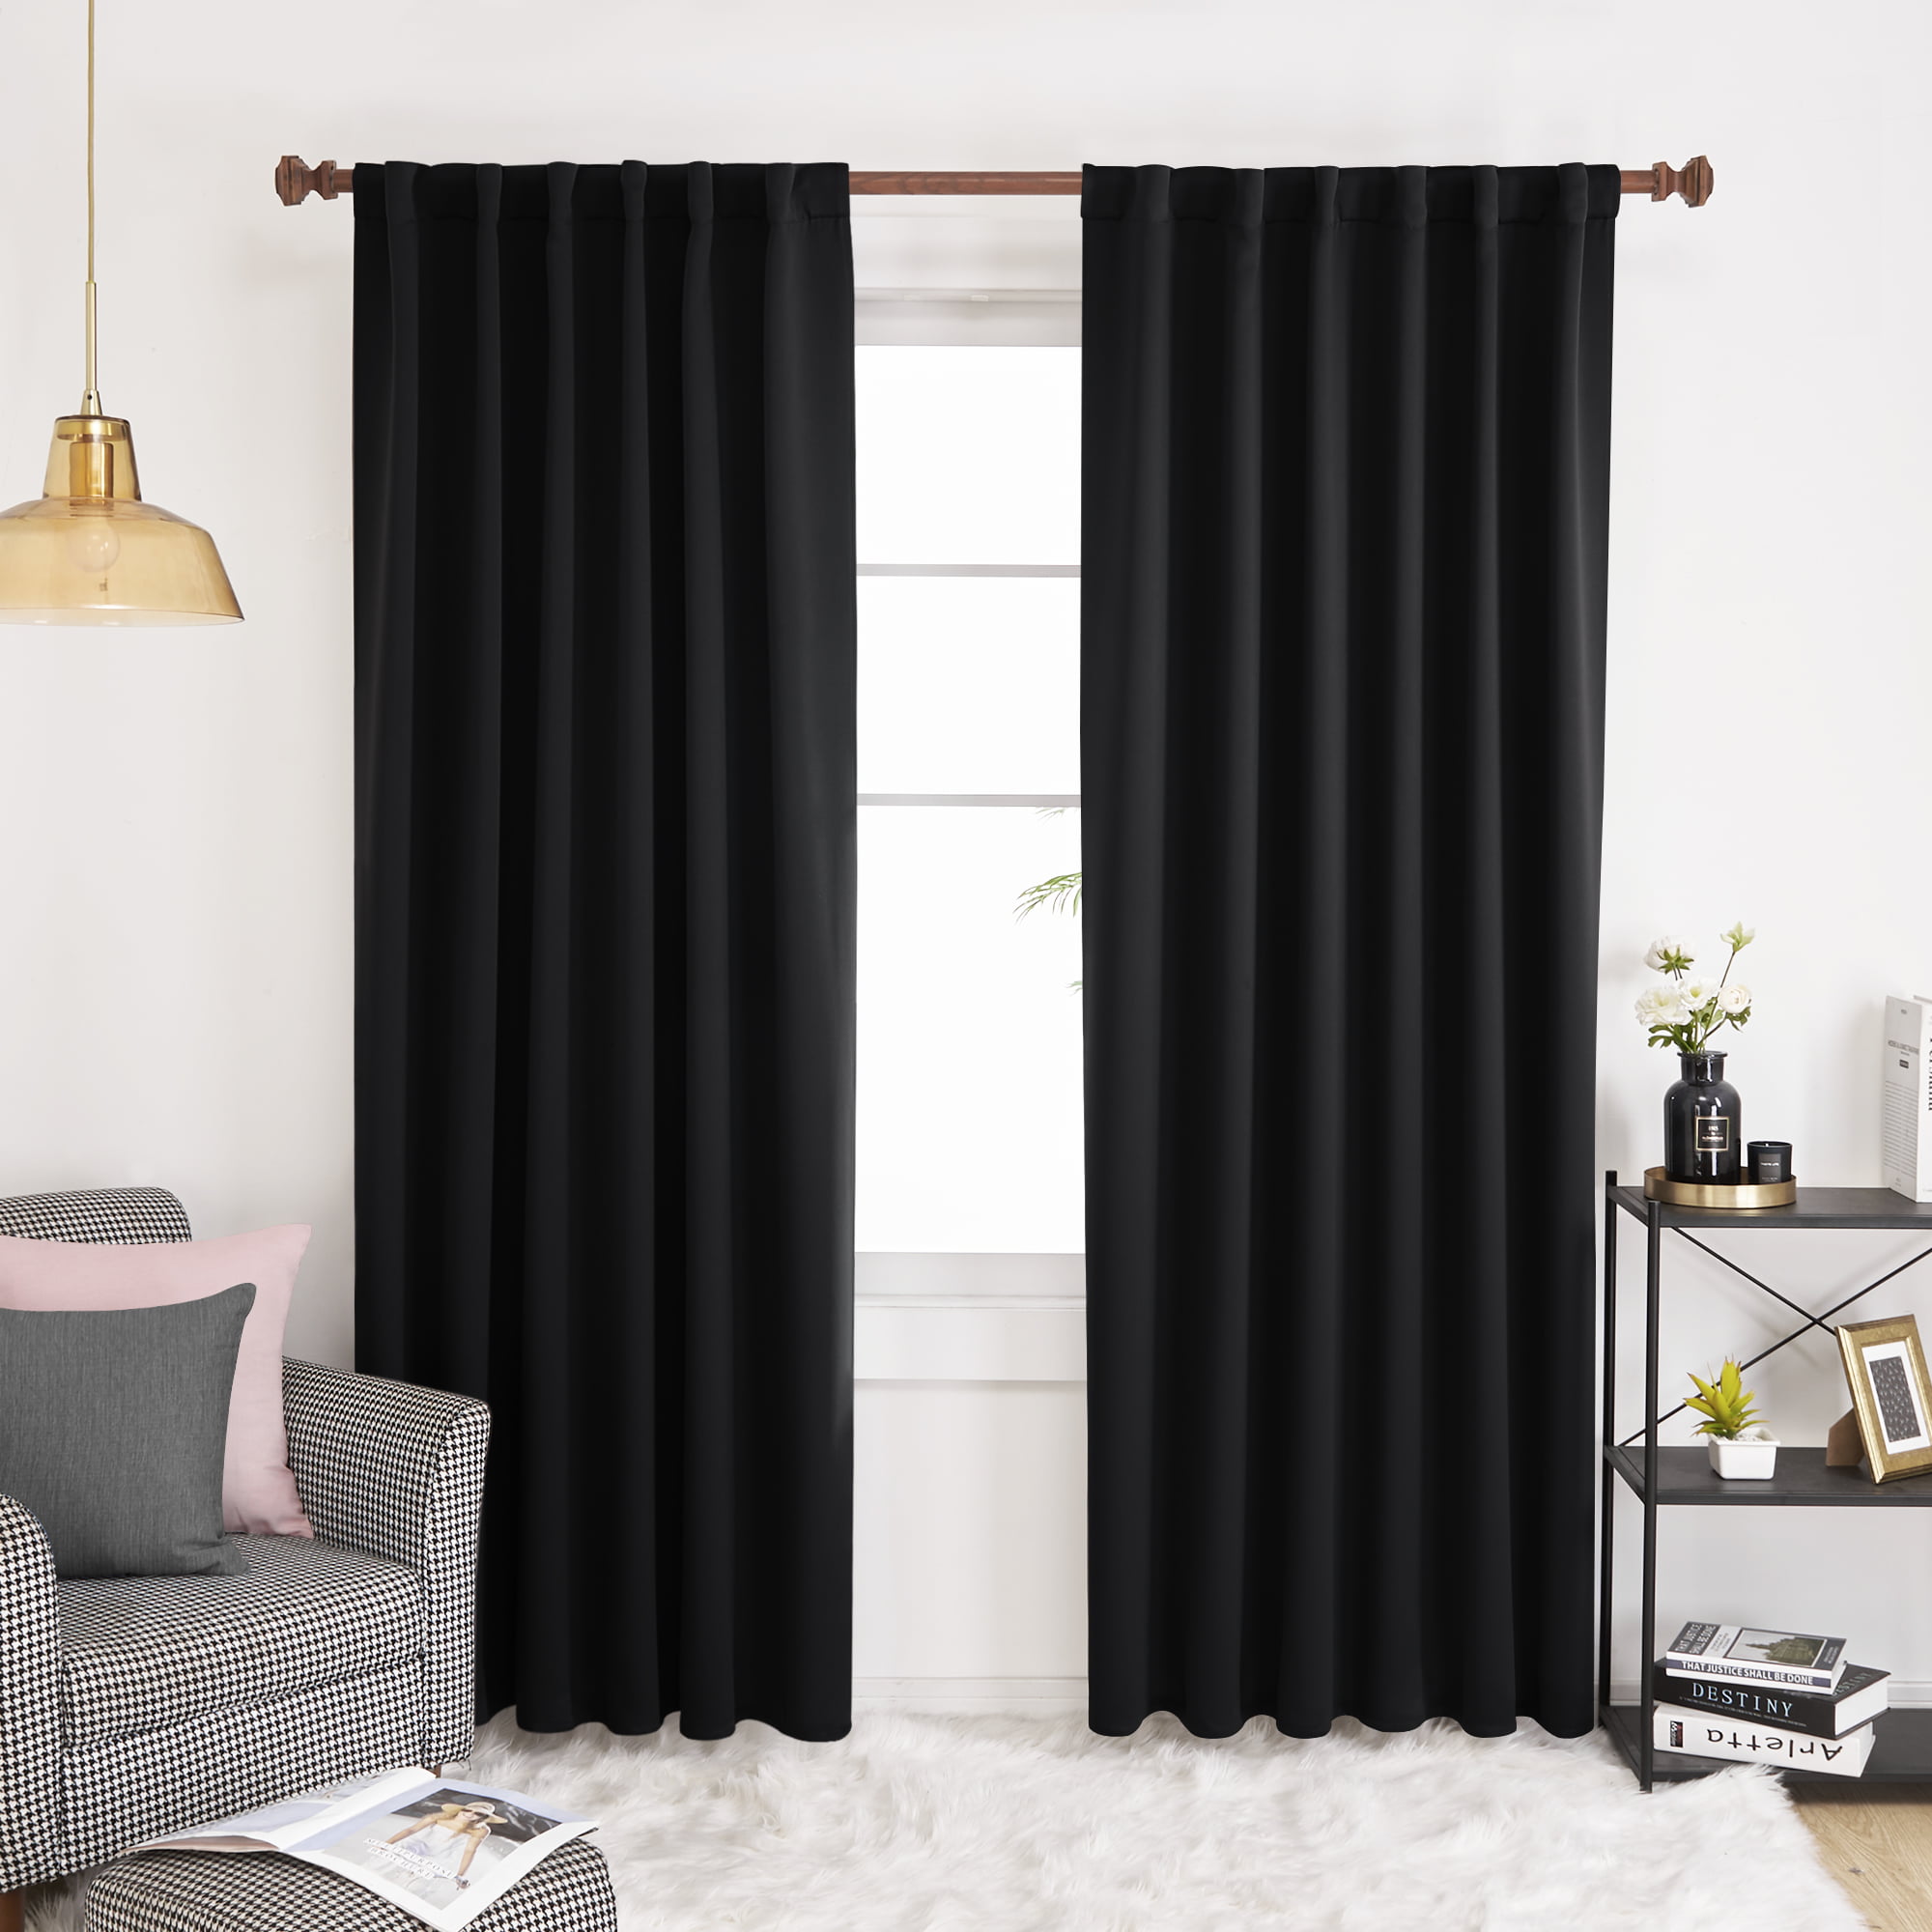 Details about   Brown 84 inch High Fire Rated/Treated Velvet Curtain Panel w/Rod Pocket Drape 